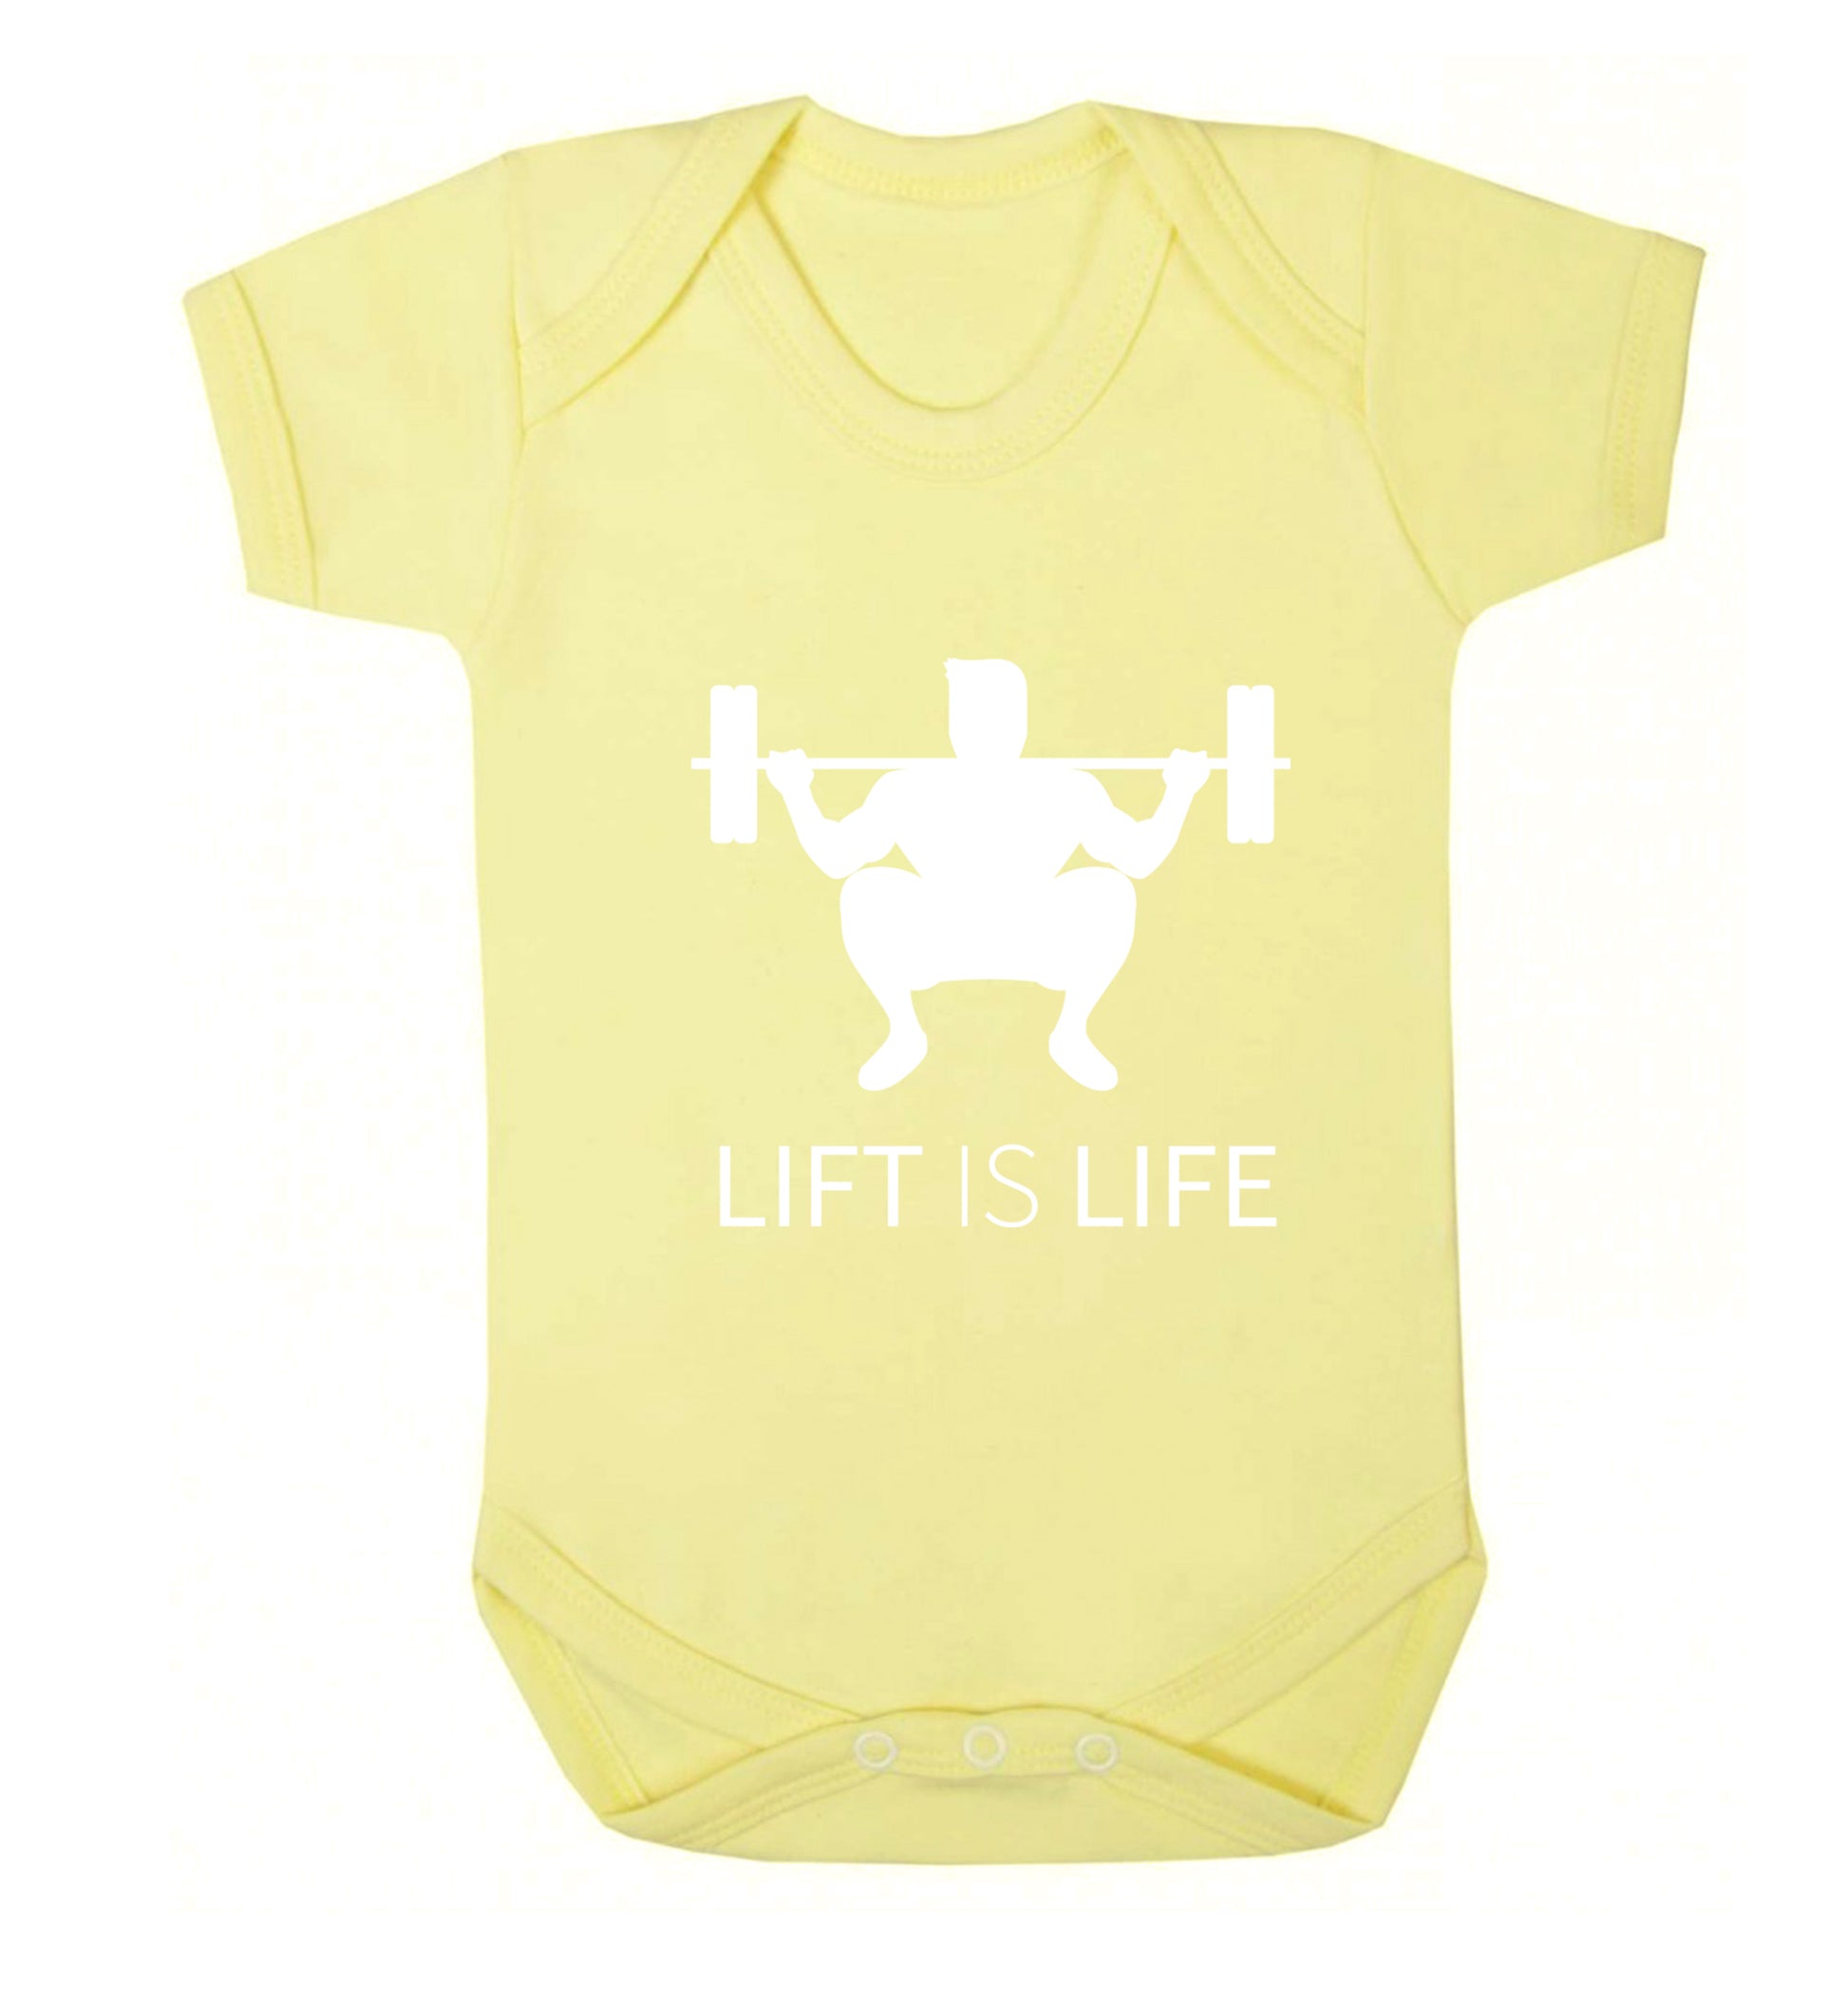 Lift is life Baby Vest pale yellow 18-24 months